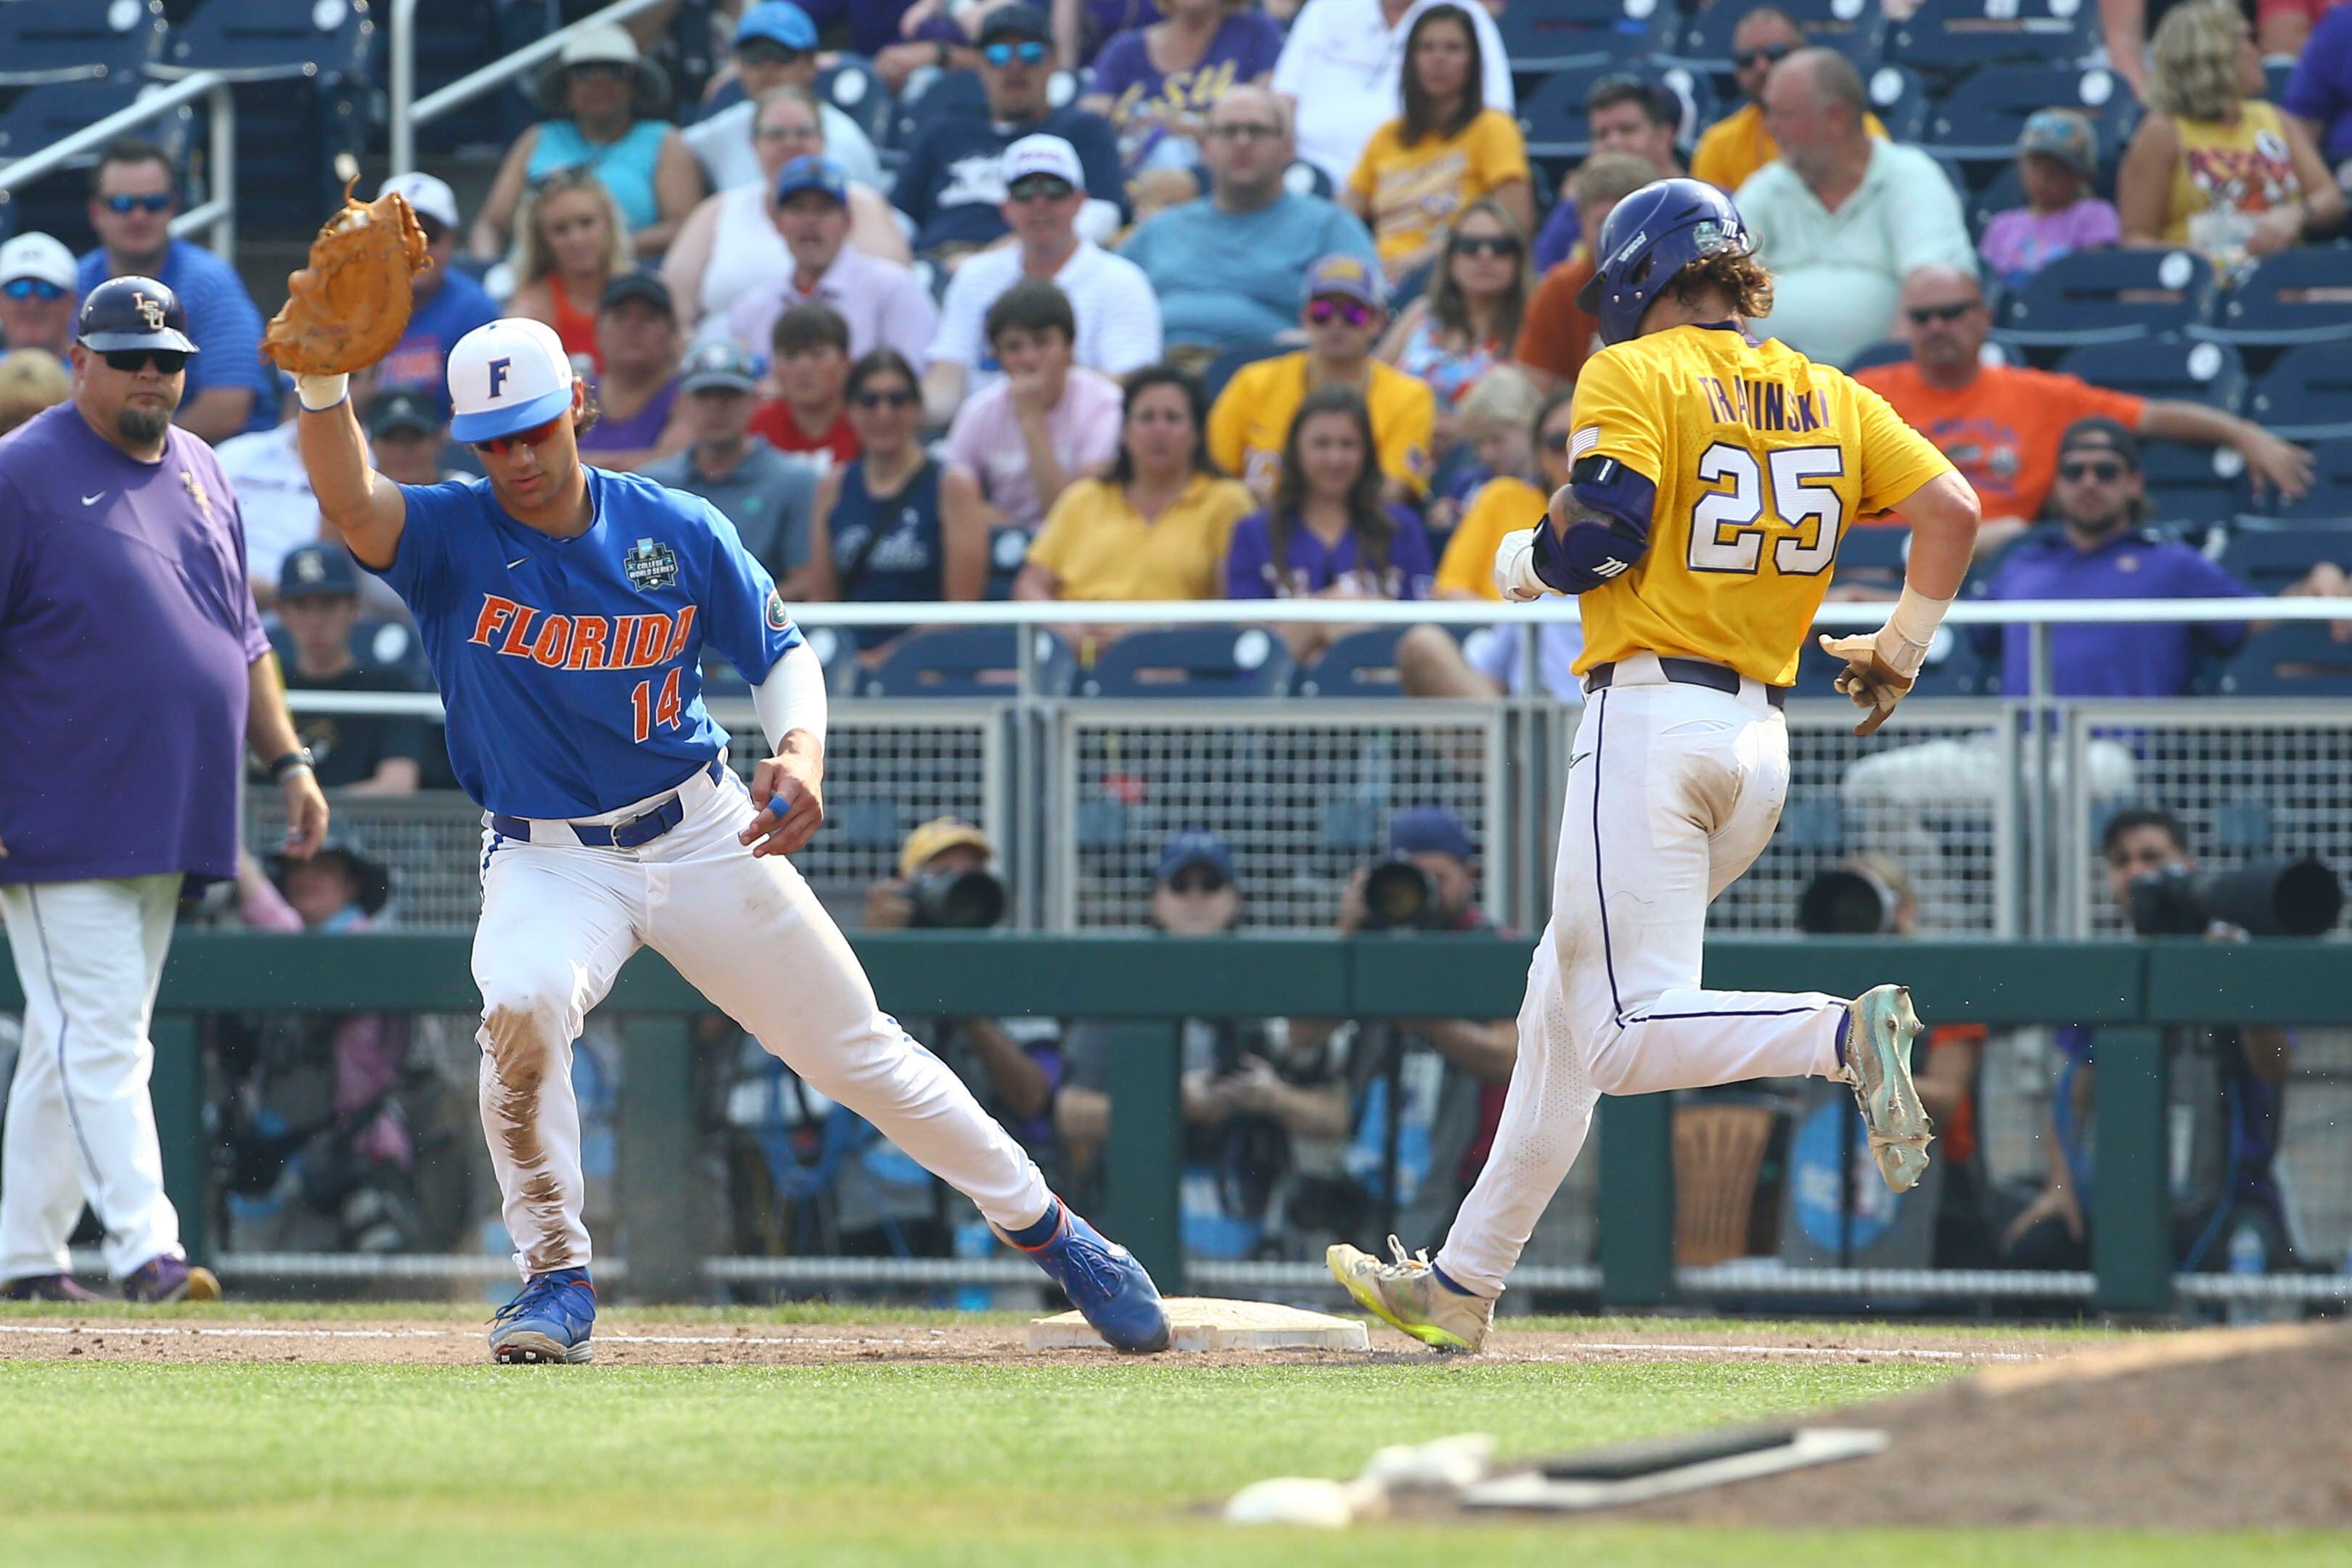 MCWS: Ty Evans' Grand Slam Lifts Florida to Record-Breaking 24-4